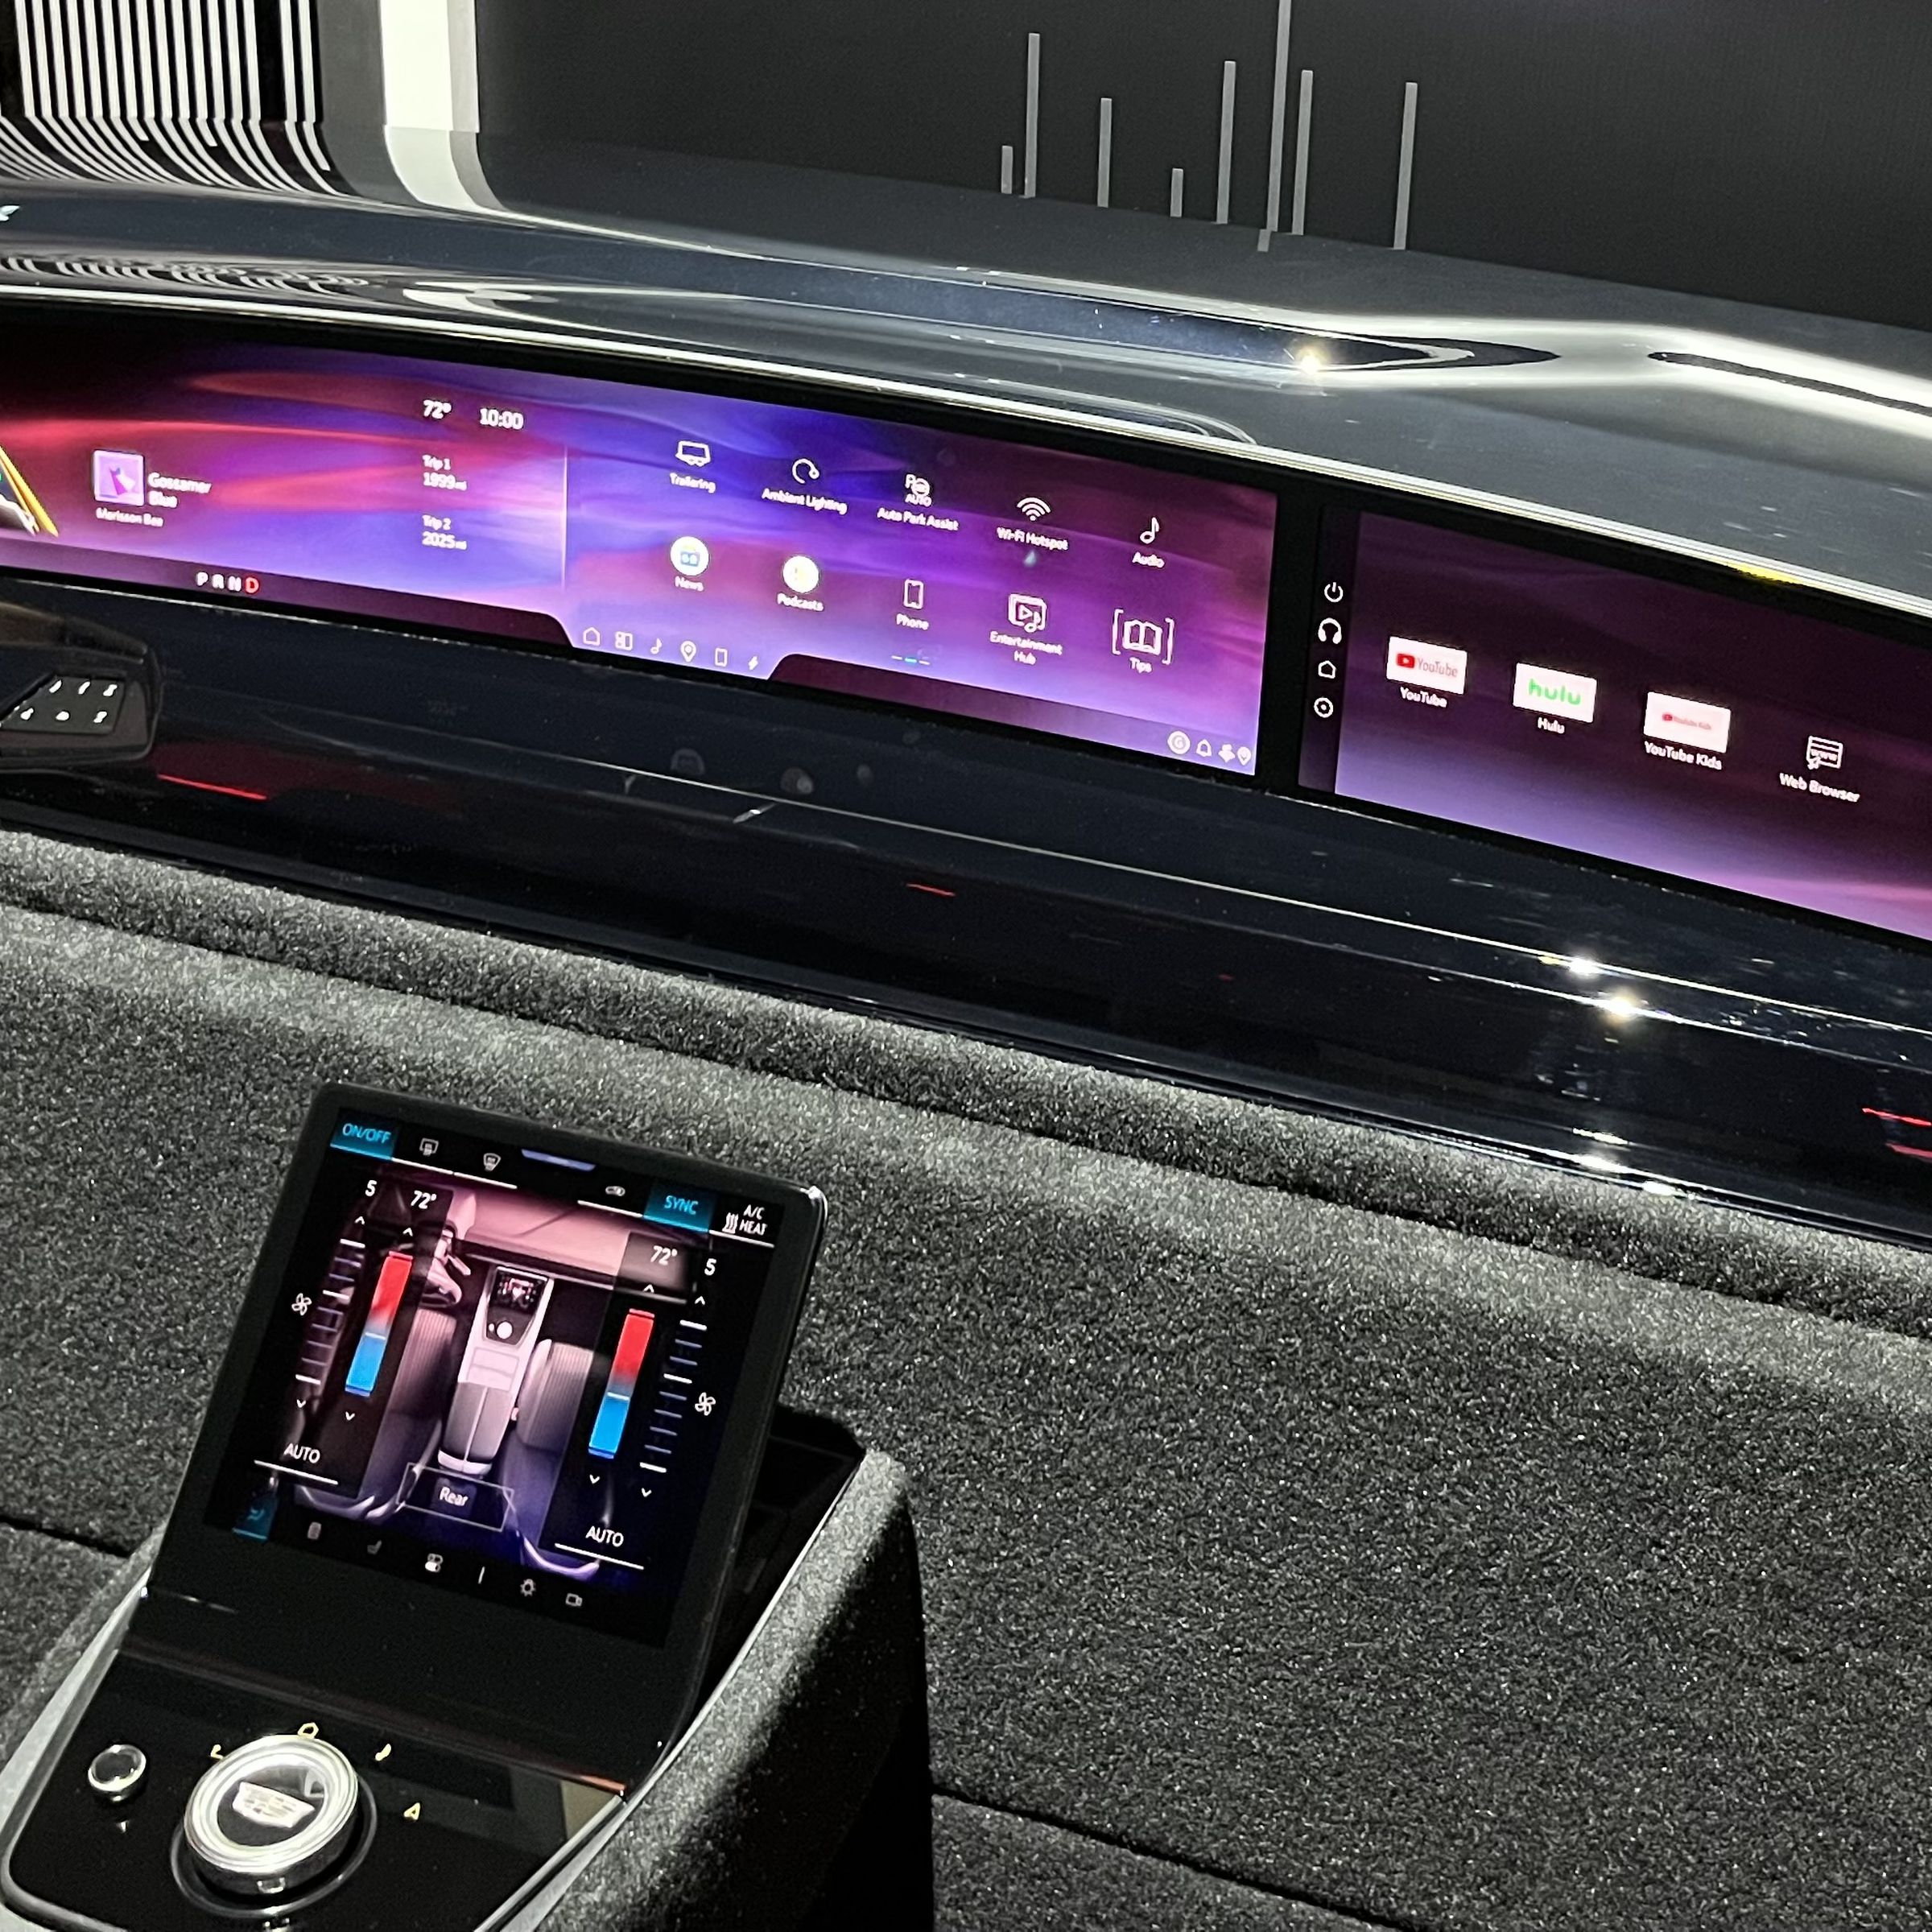 Kiosk showing just the panoramic display dashboard that goes inside the Escalade IQ along with a driver control screen panel under it